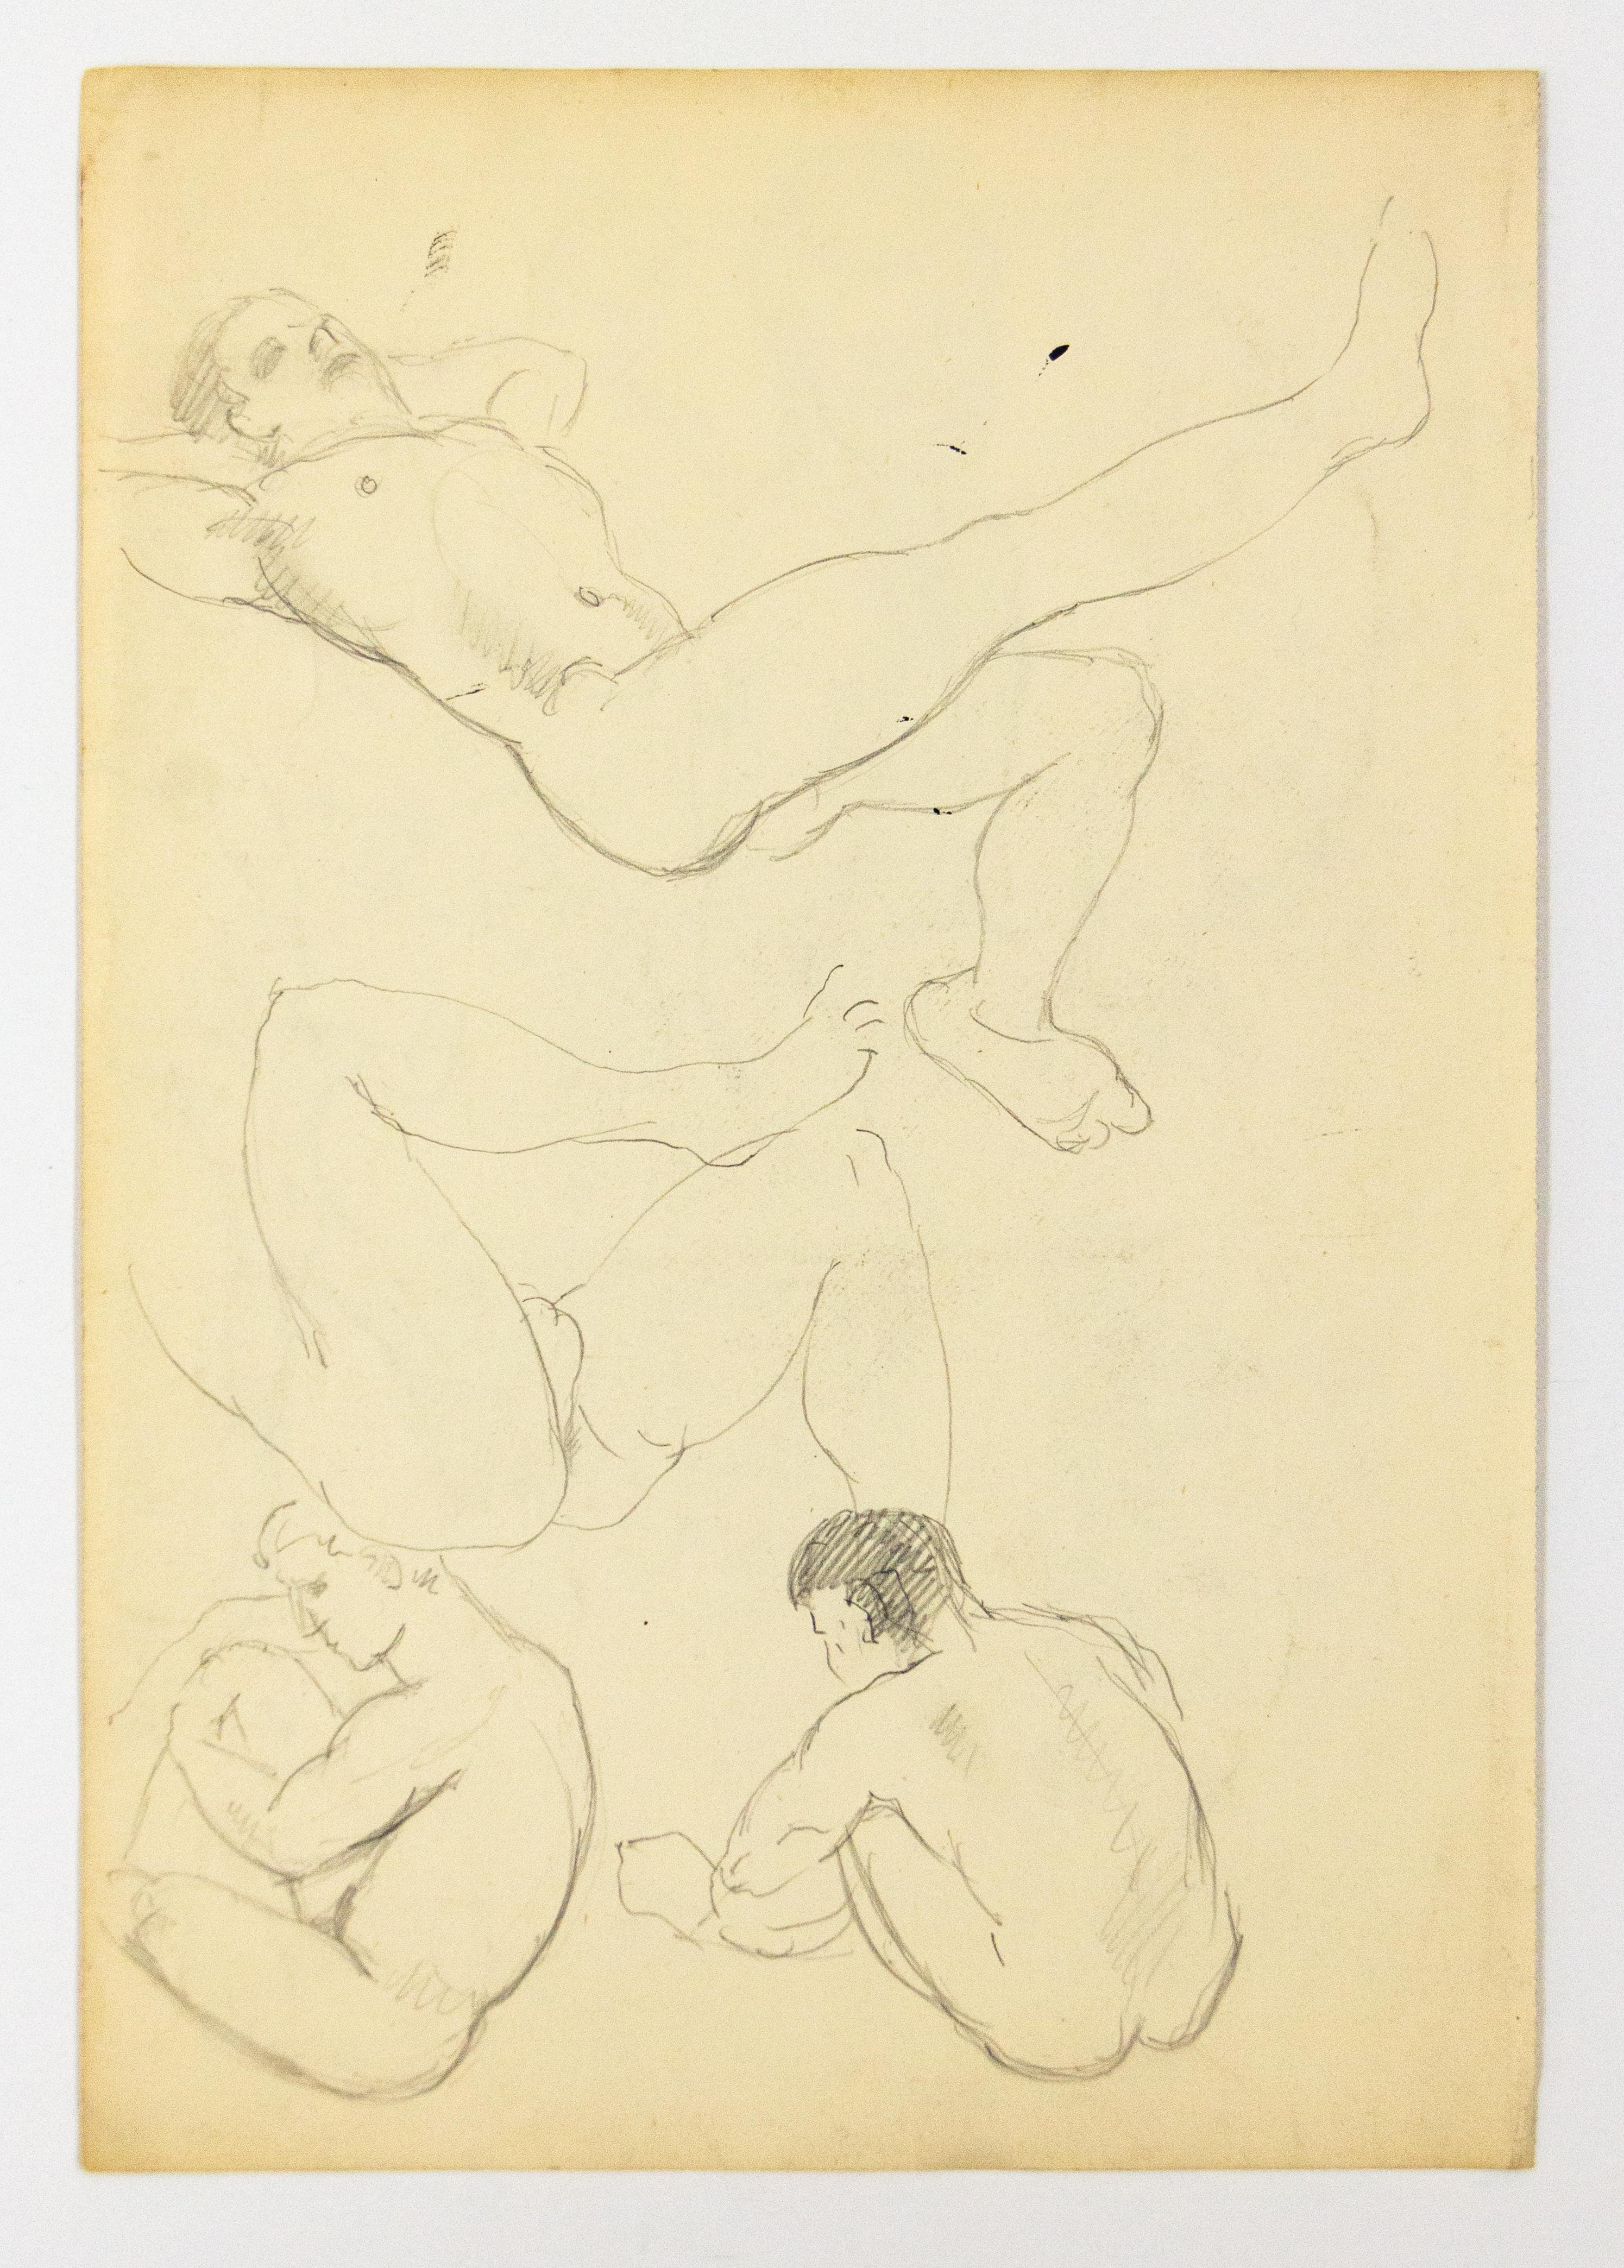 Many Figure Studies and Studies for Compositions with Groups - Contemporary Art by John S. Barrington